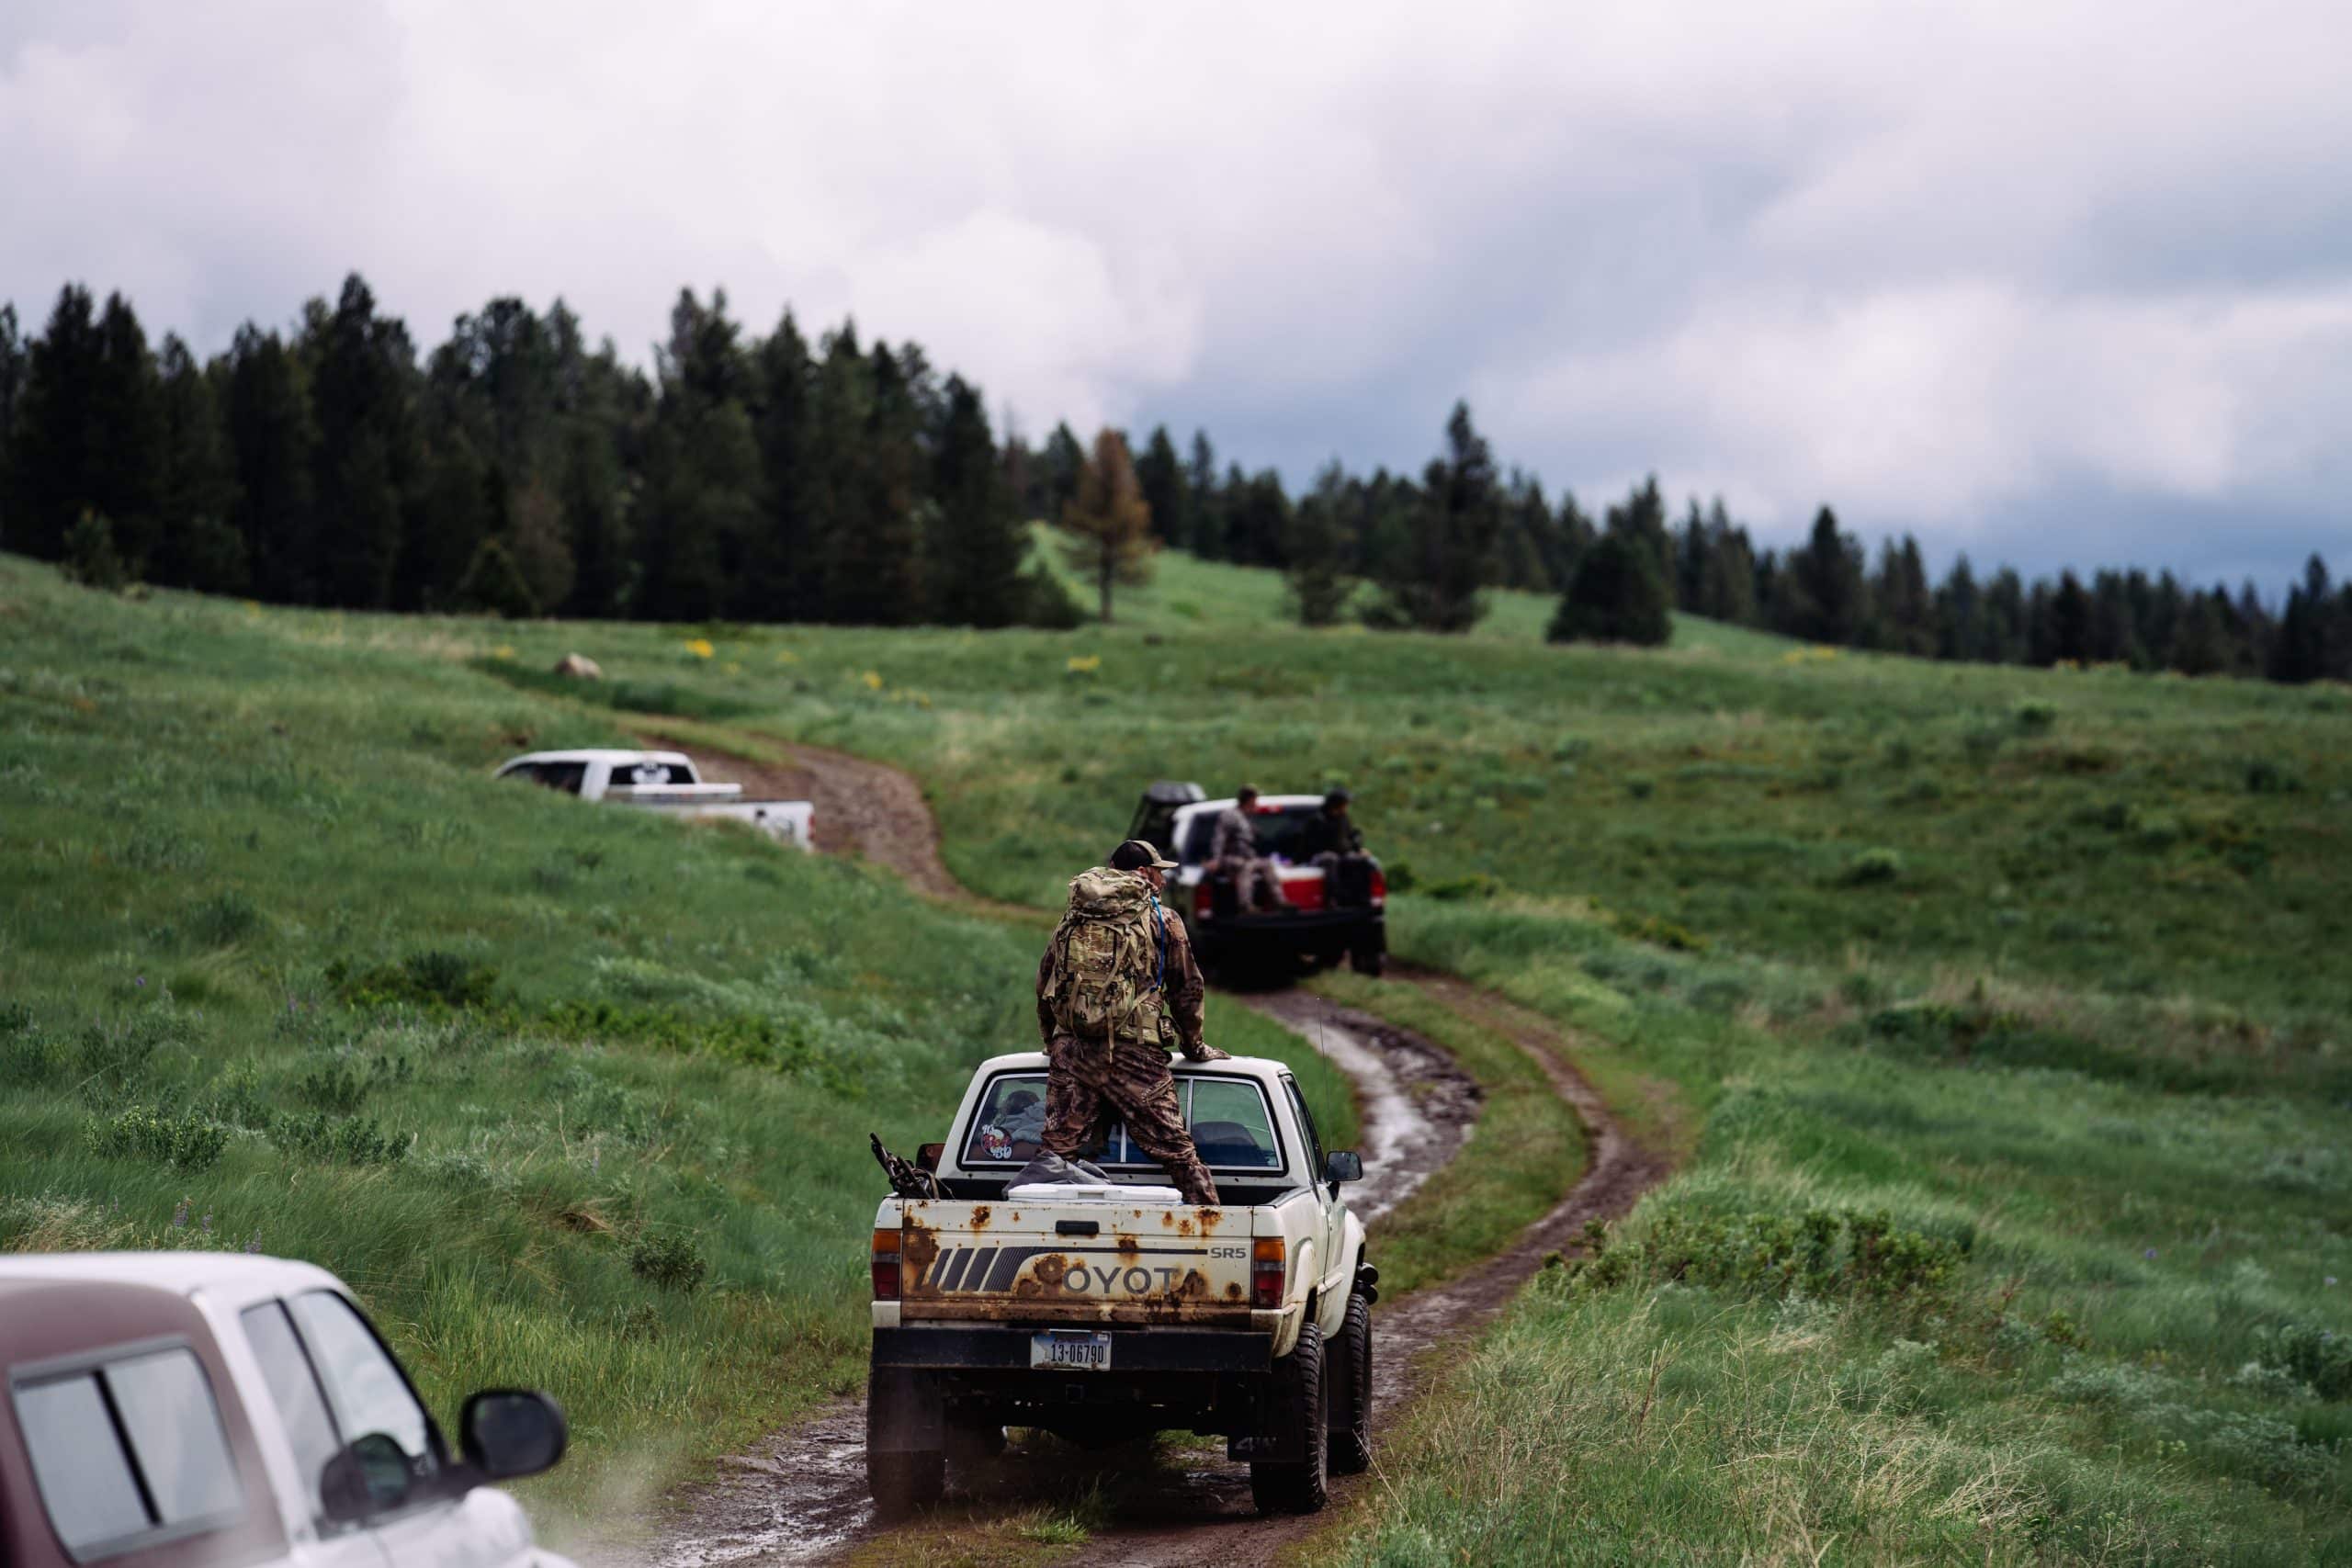 The muddy road leading deeper into the Blackfoot-Clearwater Game Range in Montana.